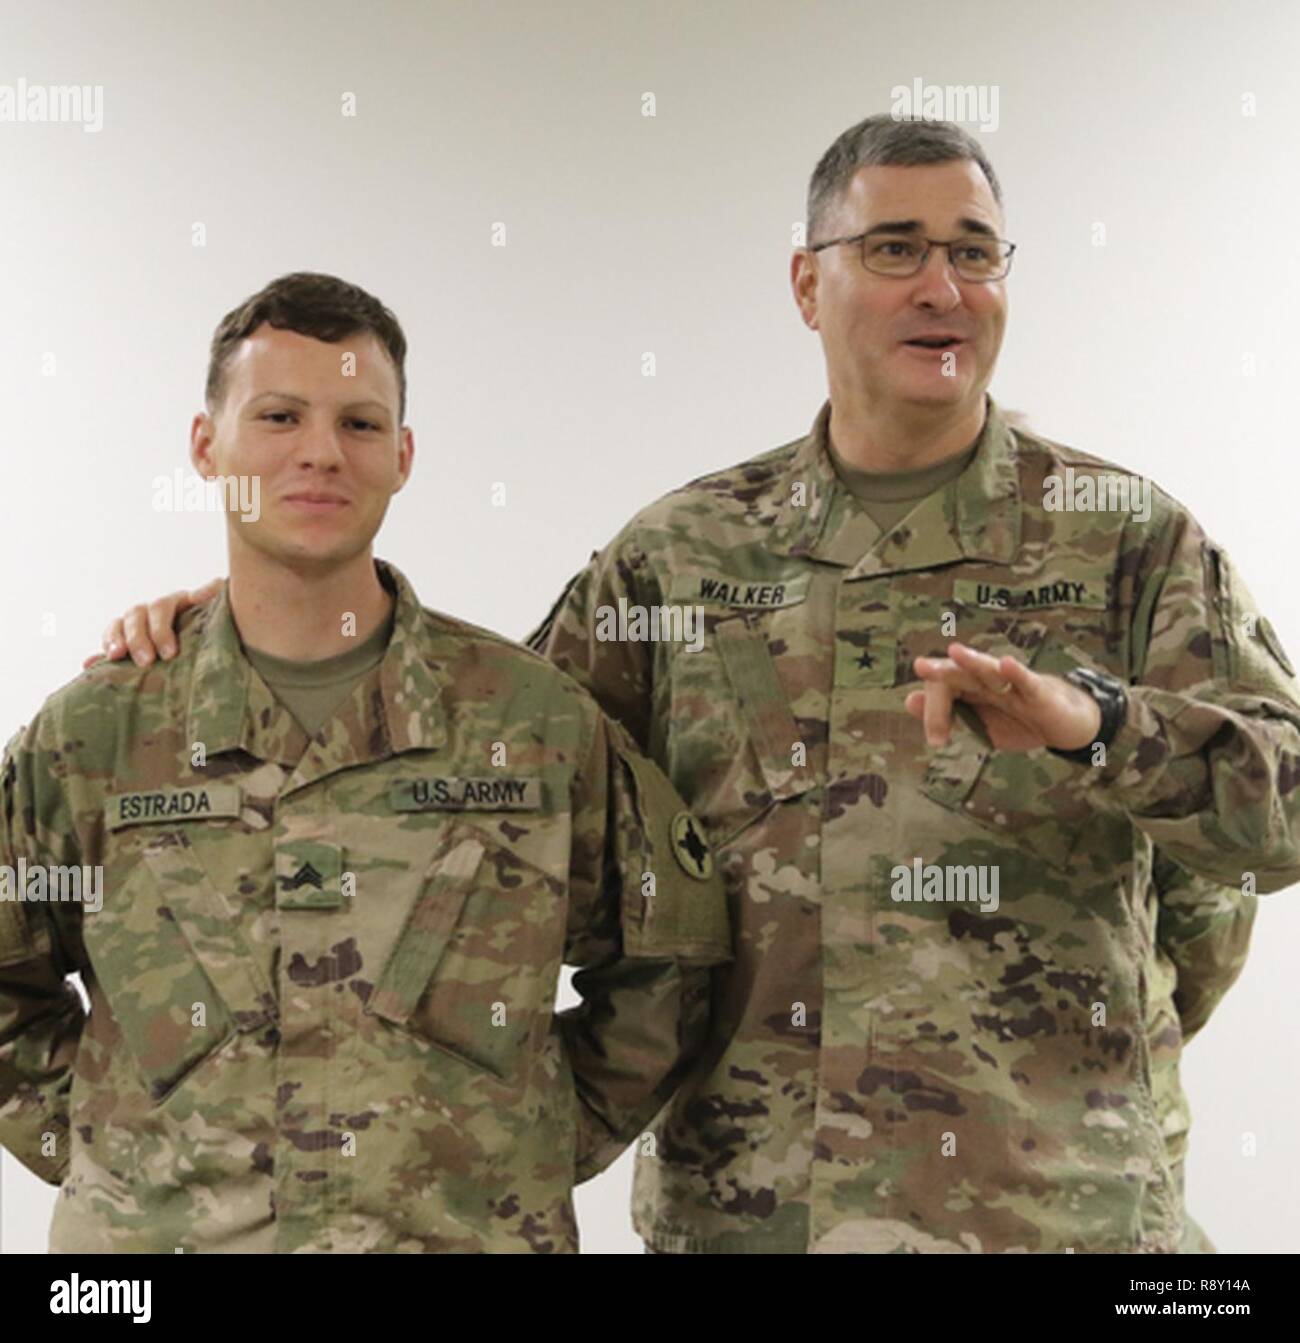 Newly promoted Sgt. Casiano Estrada, 184th Sustainment Command, stands with Brig. Gen. Clint E. Walker, 184th SC commander. Mentorship is an important key to the success of future leaders of the Army. Stock Photo